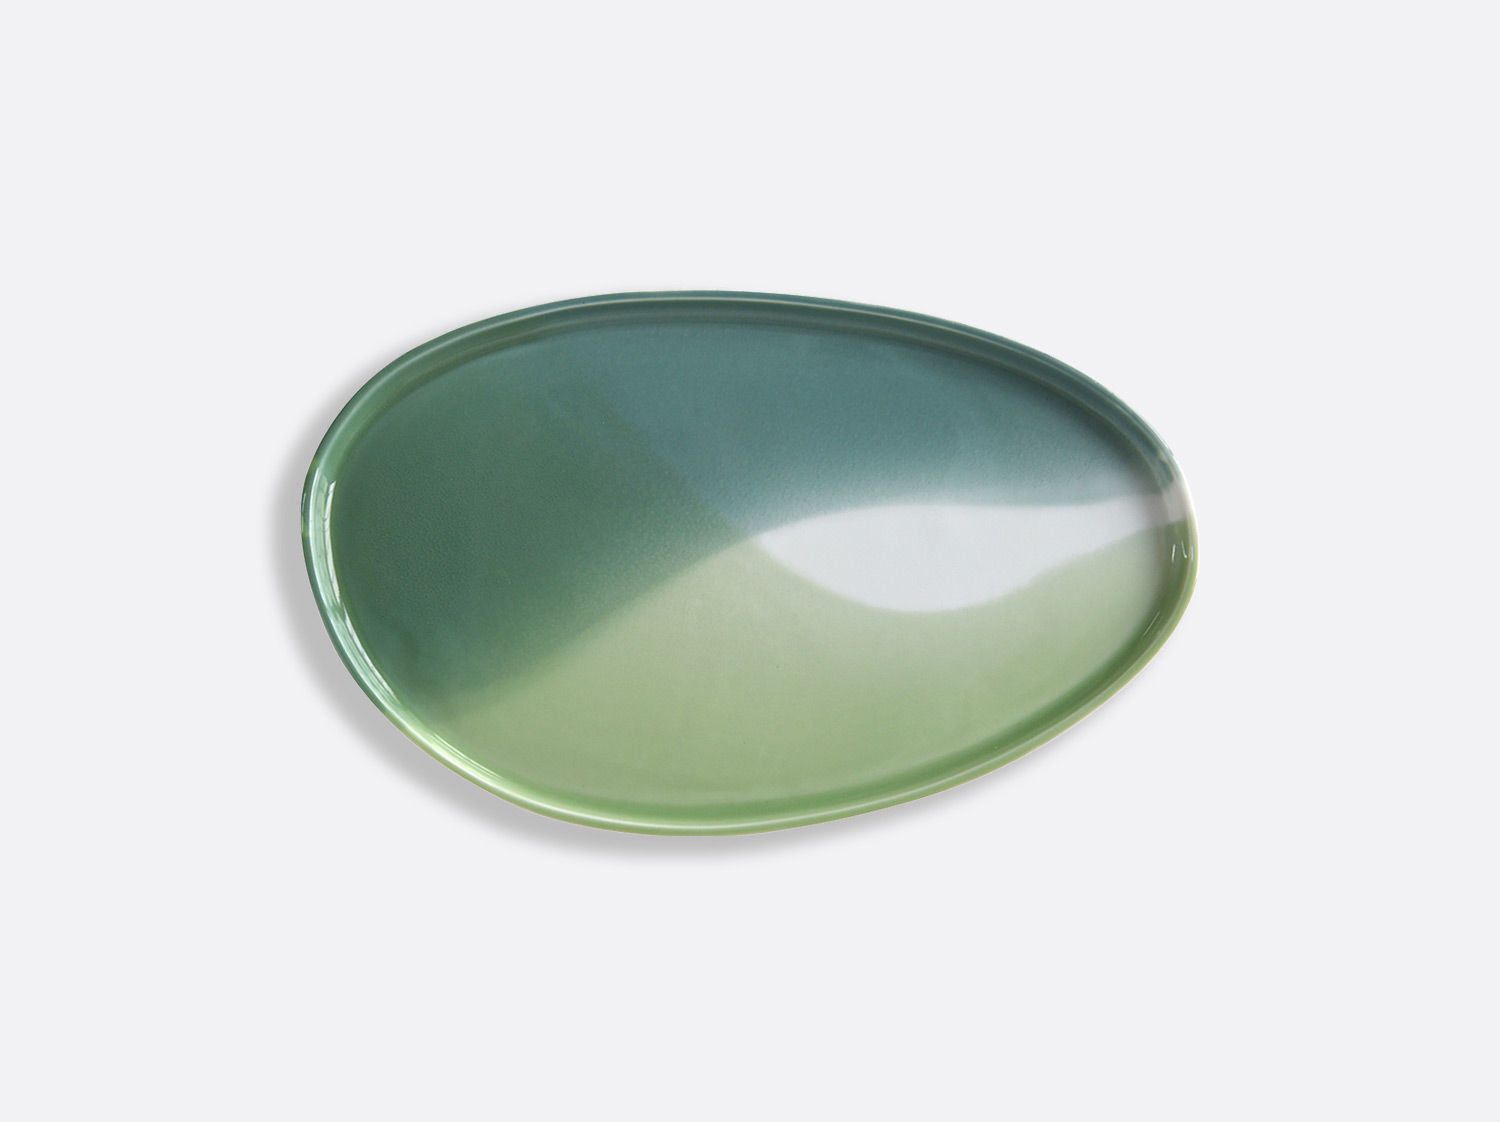 China Platter S3 blue and green of the collection Ombres - Sarah-Linda Forrer | Bernardaud